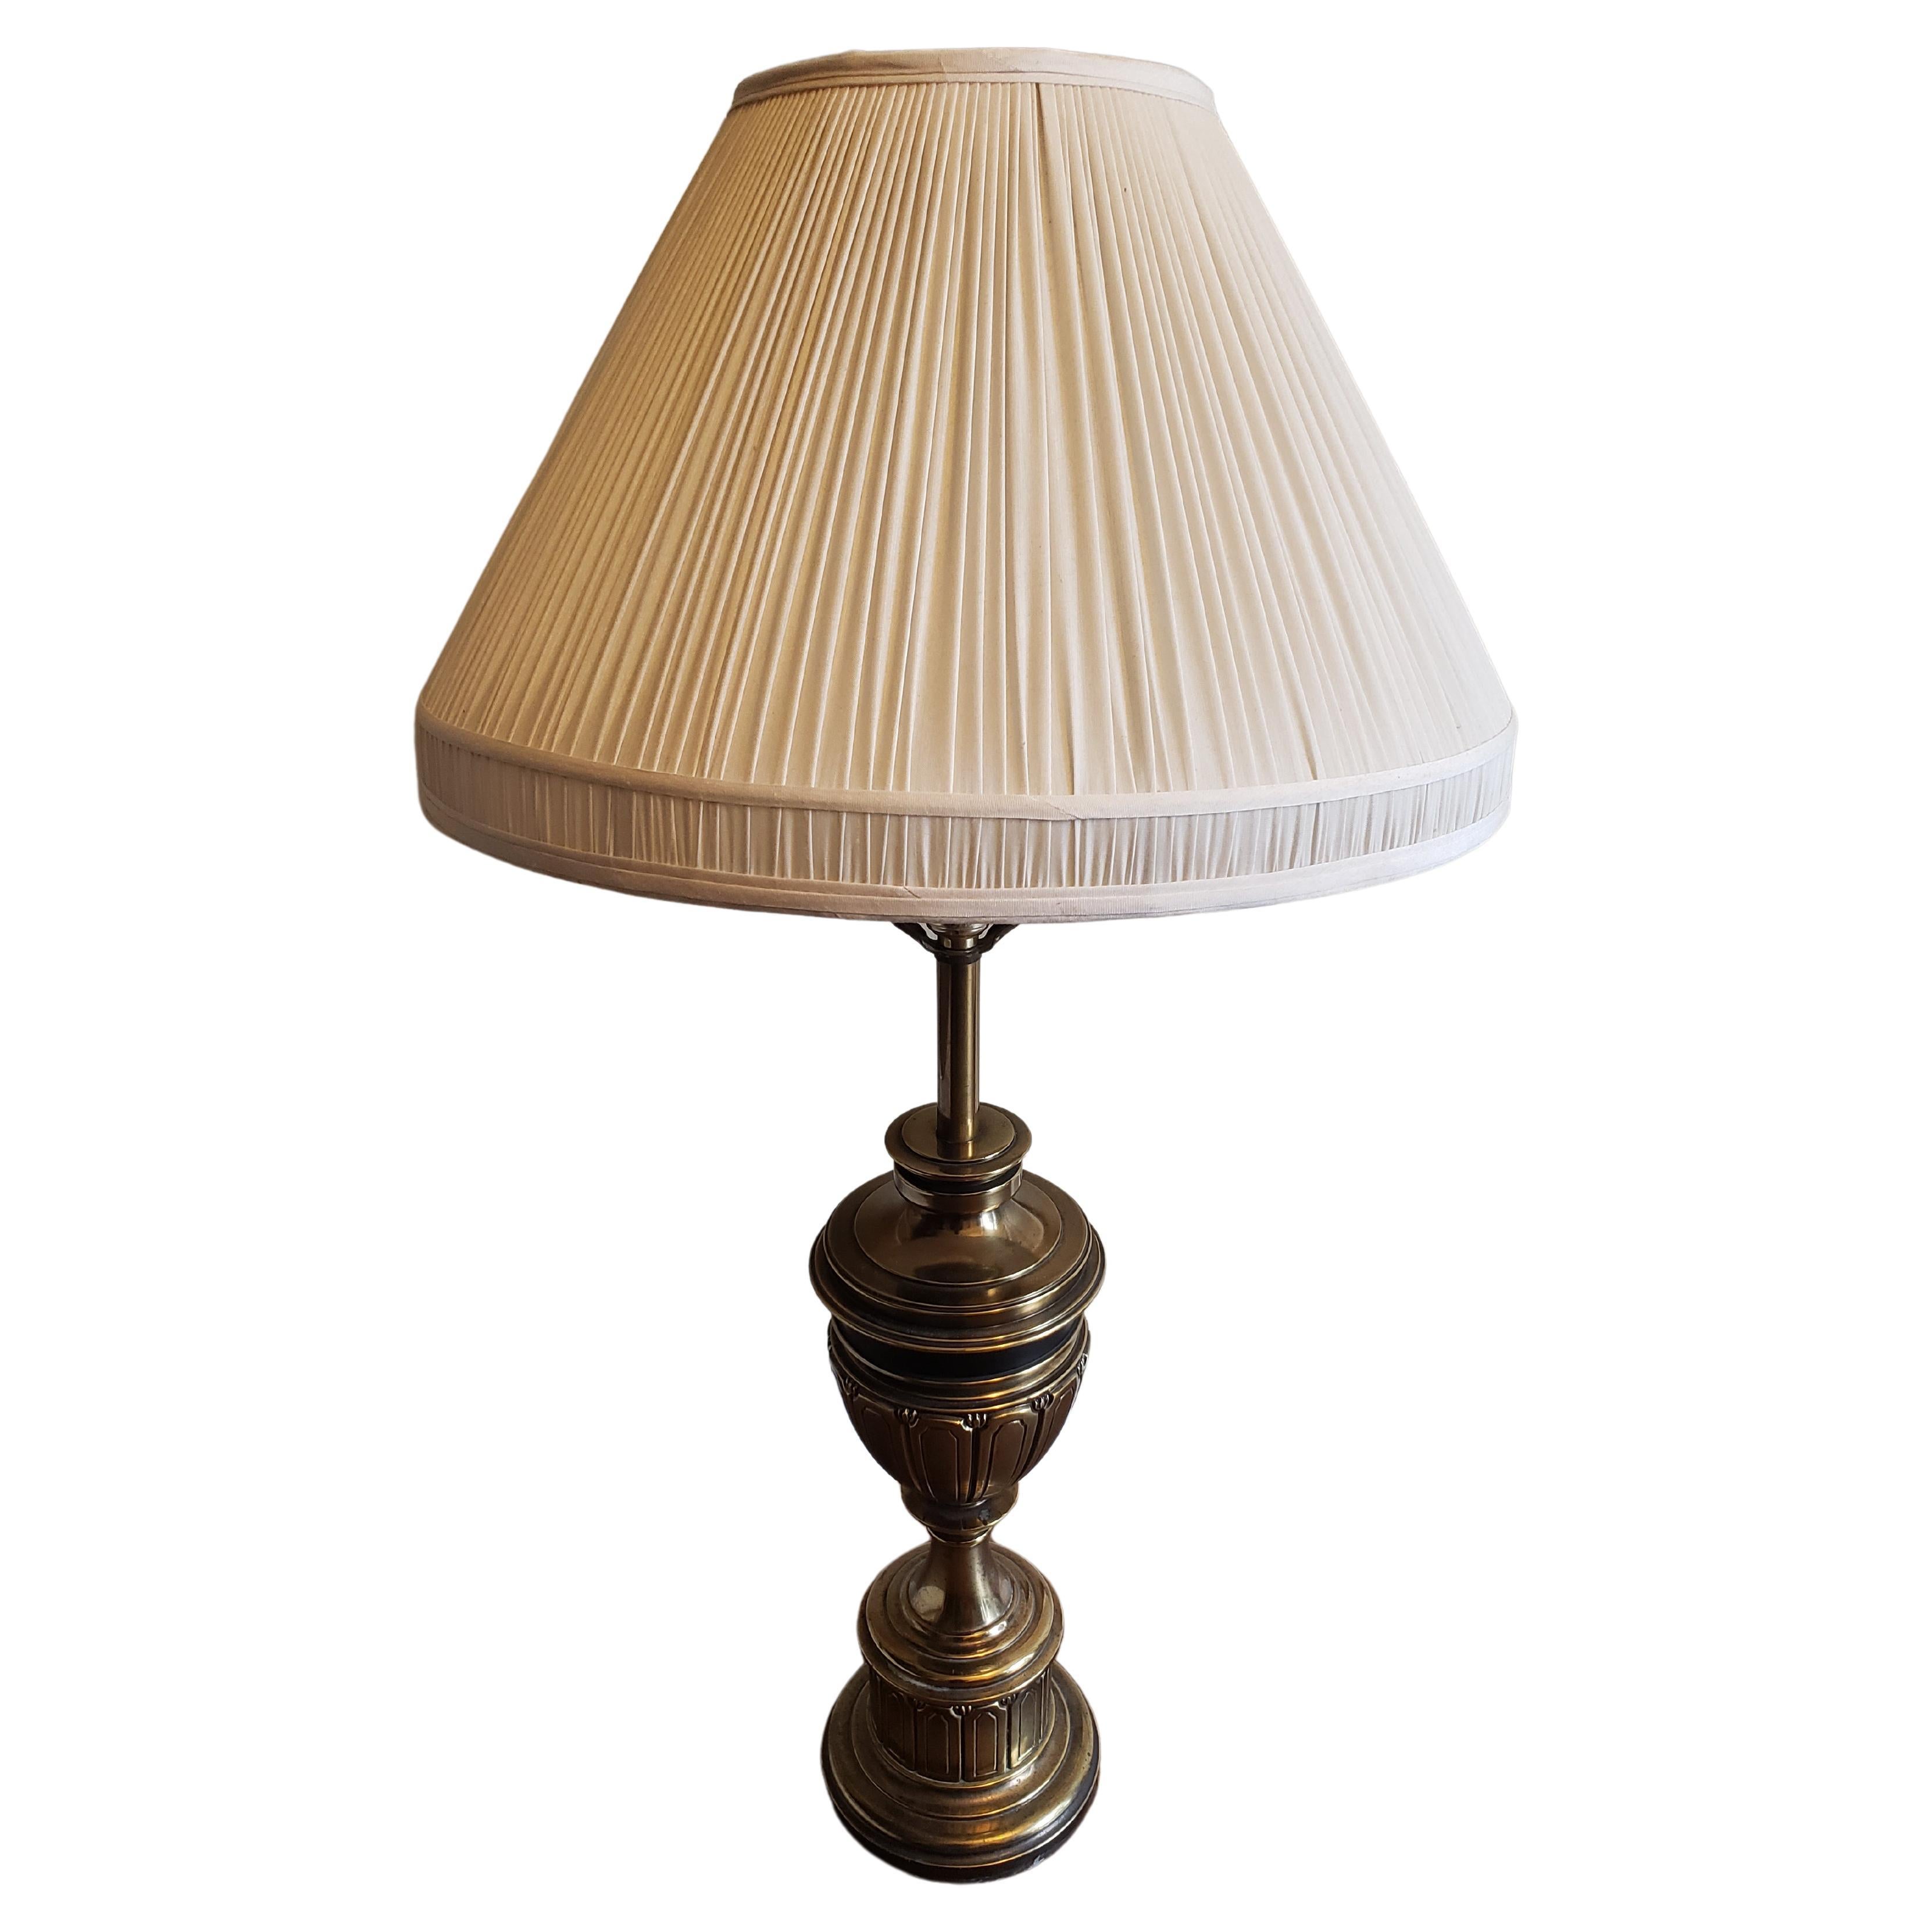 Stiffel Solid brass trophy table lamp, Circa 1960s
Measures 7